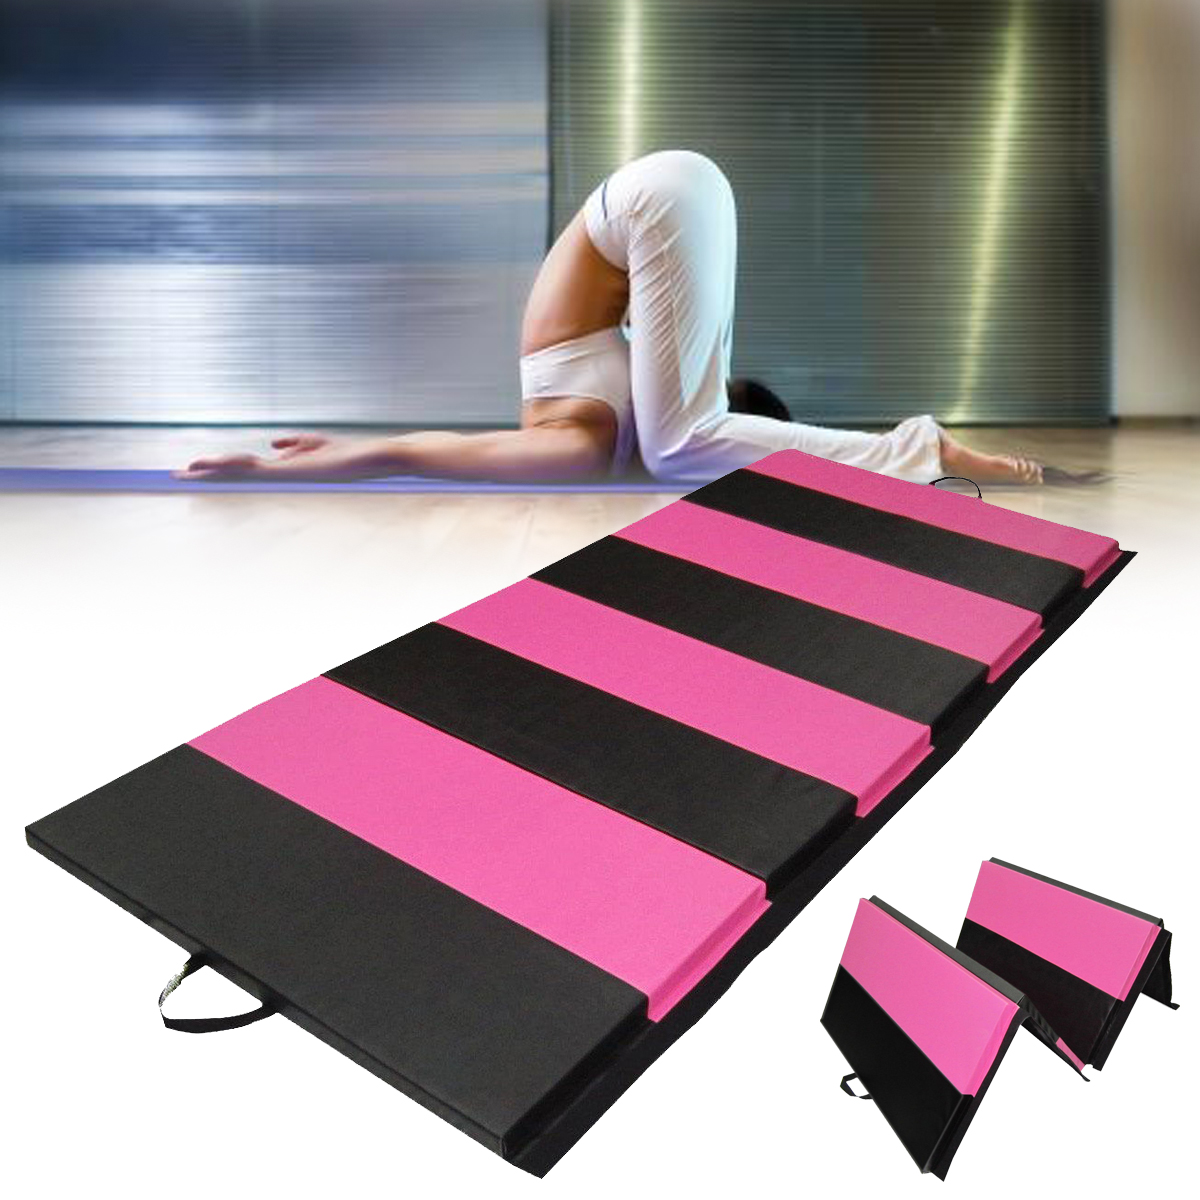 70x47x197inch-Foldable-Gymnastic-Mat-Exercise-Yoga-Fitness-Workout-Tumbling-Pad-1245140-2